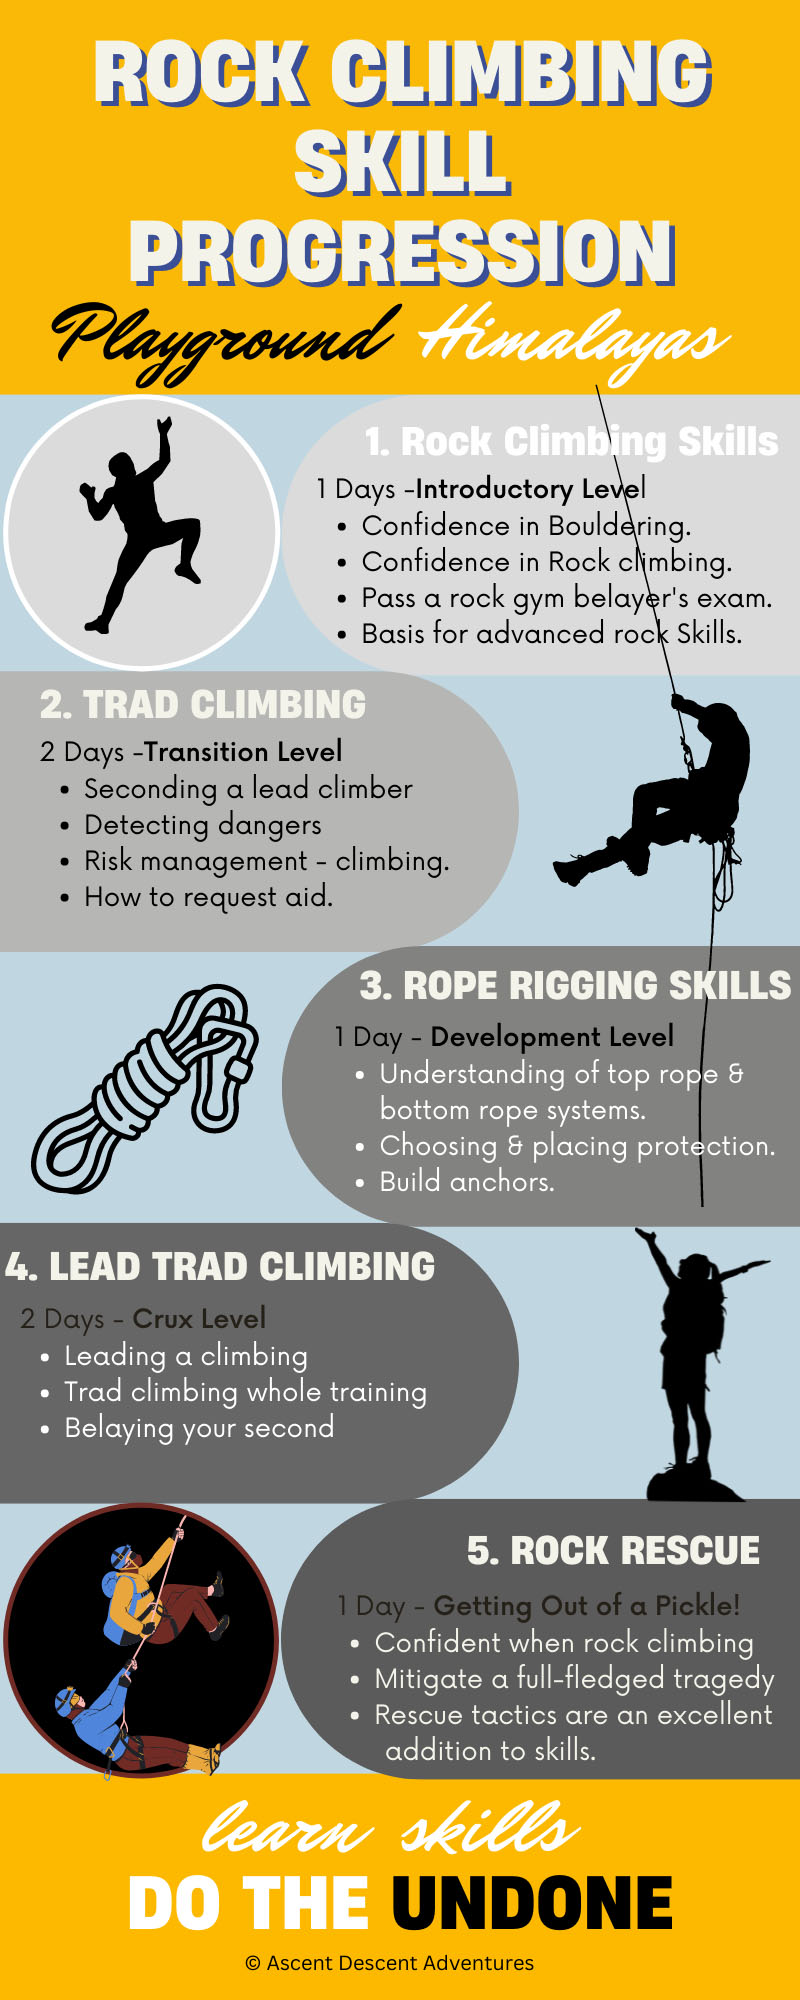 Rock climbing progression infographic depicting growth from introductory rock climbing through trad climbing intermediate level, rope rigging development level, lead climbing climax level, and rescue tactics using silhouette and color rich icons of climbers and equipment.